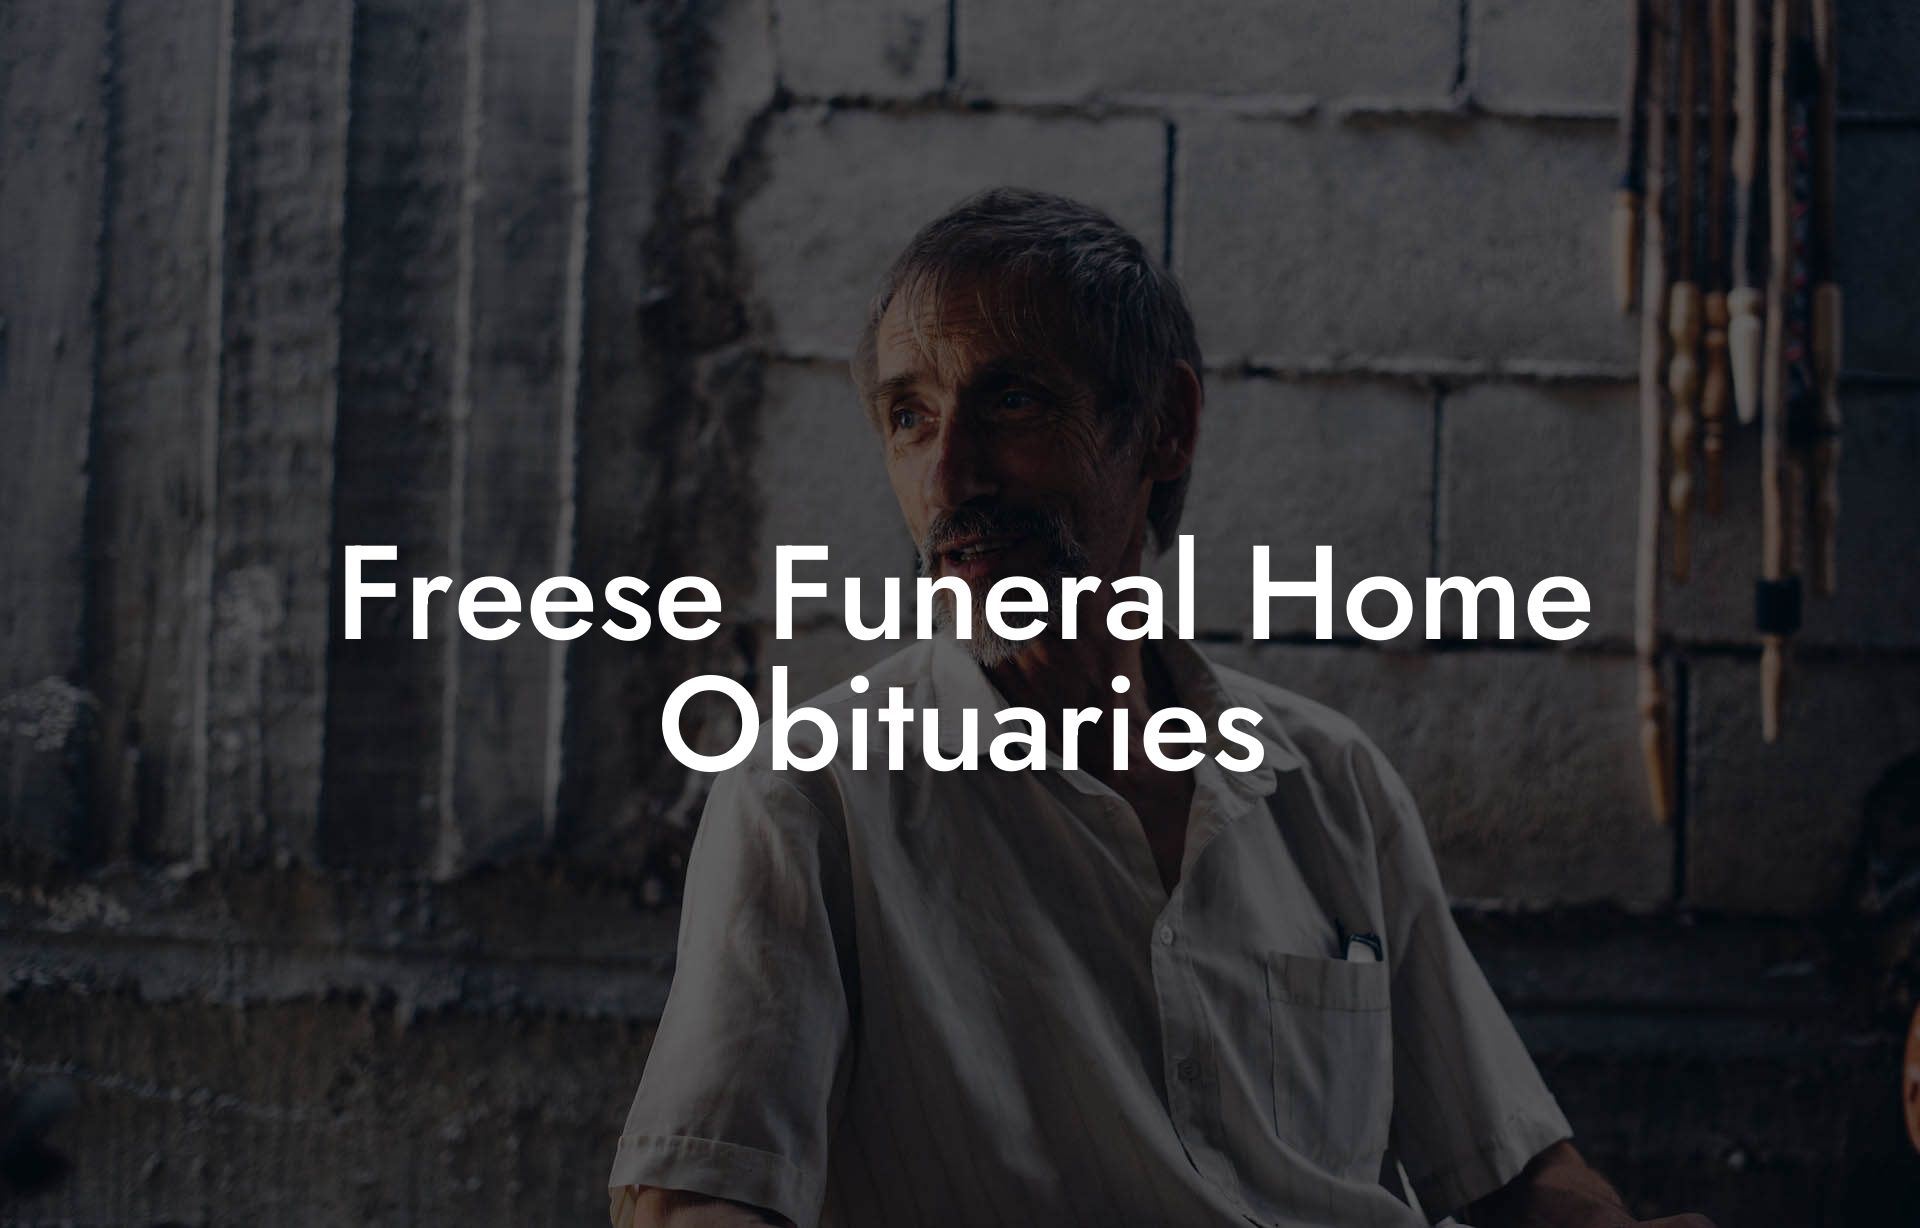 Freese Funeral Home Obituaries